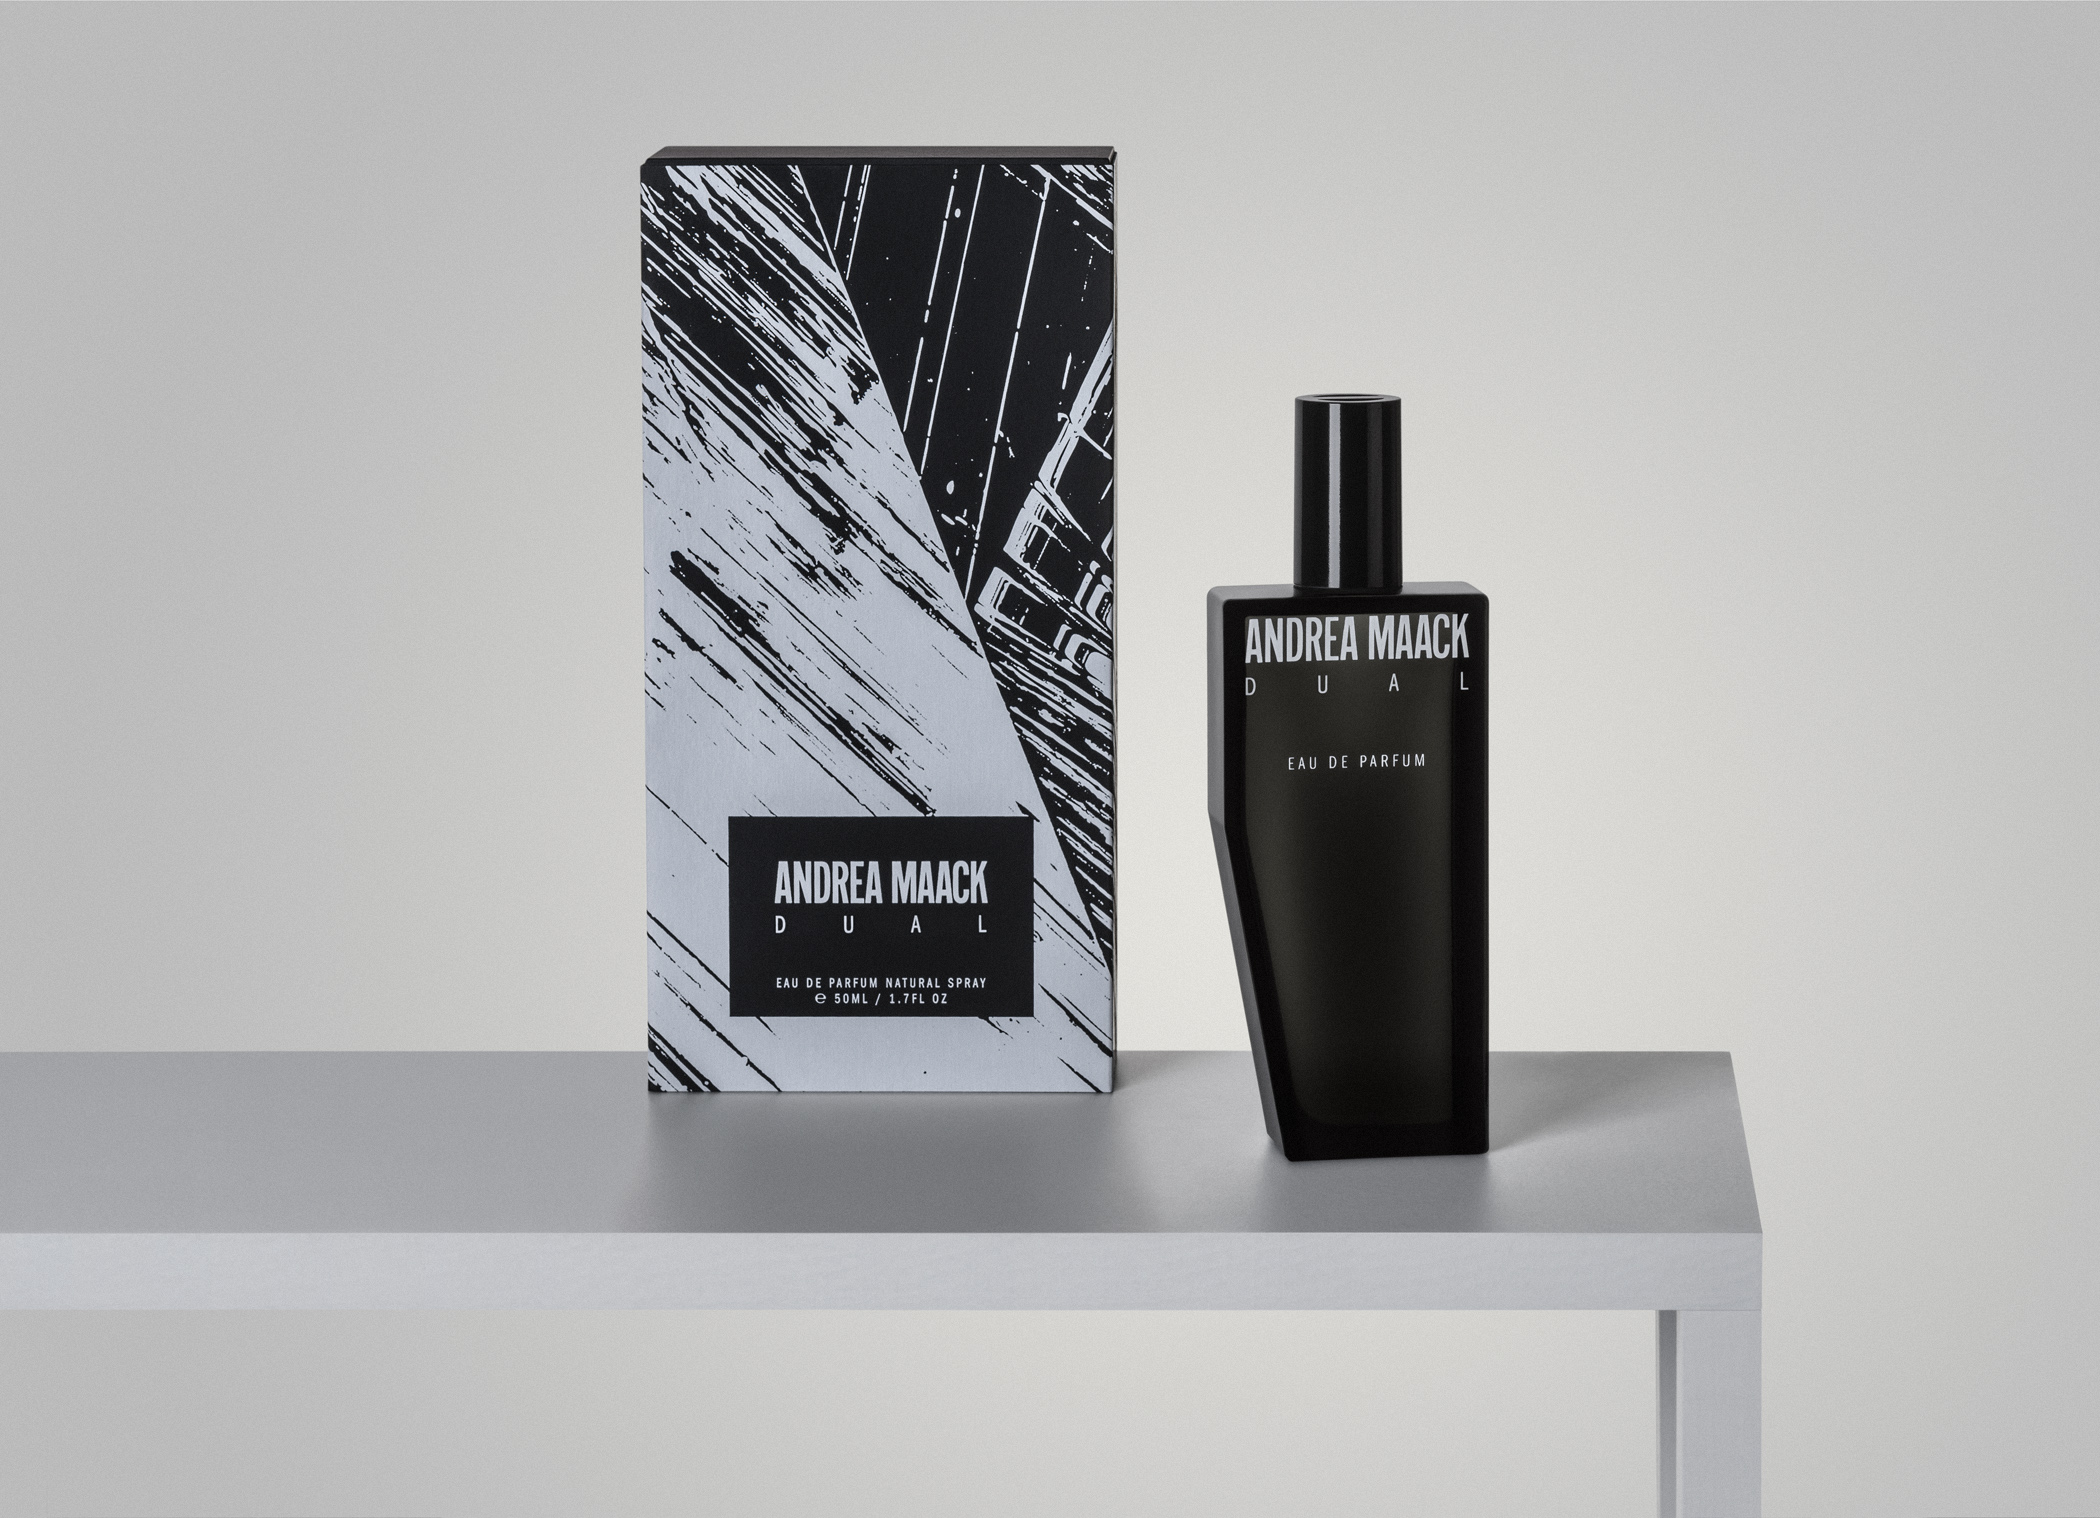 DUAL fragrance by Andrea Maack